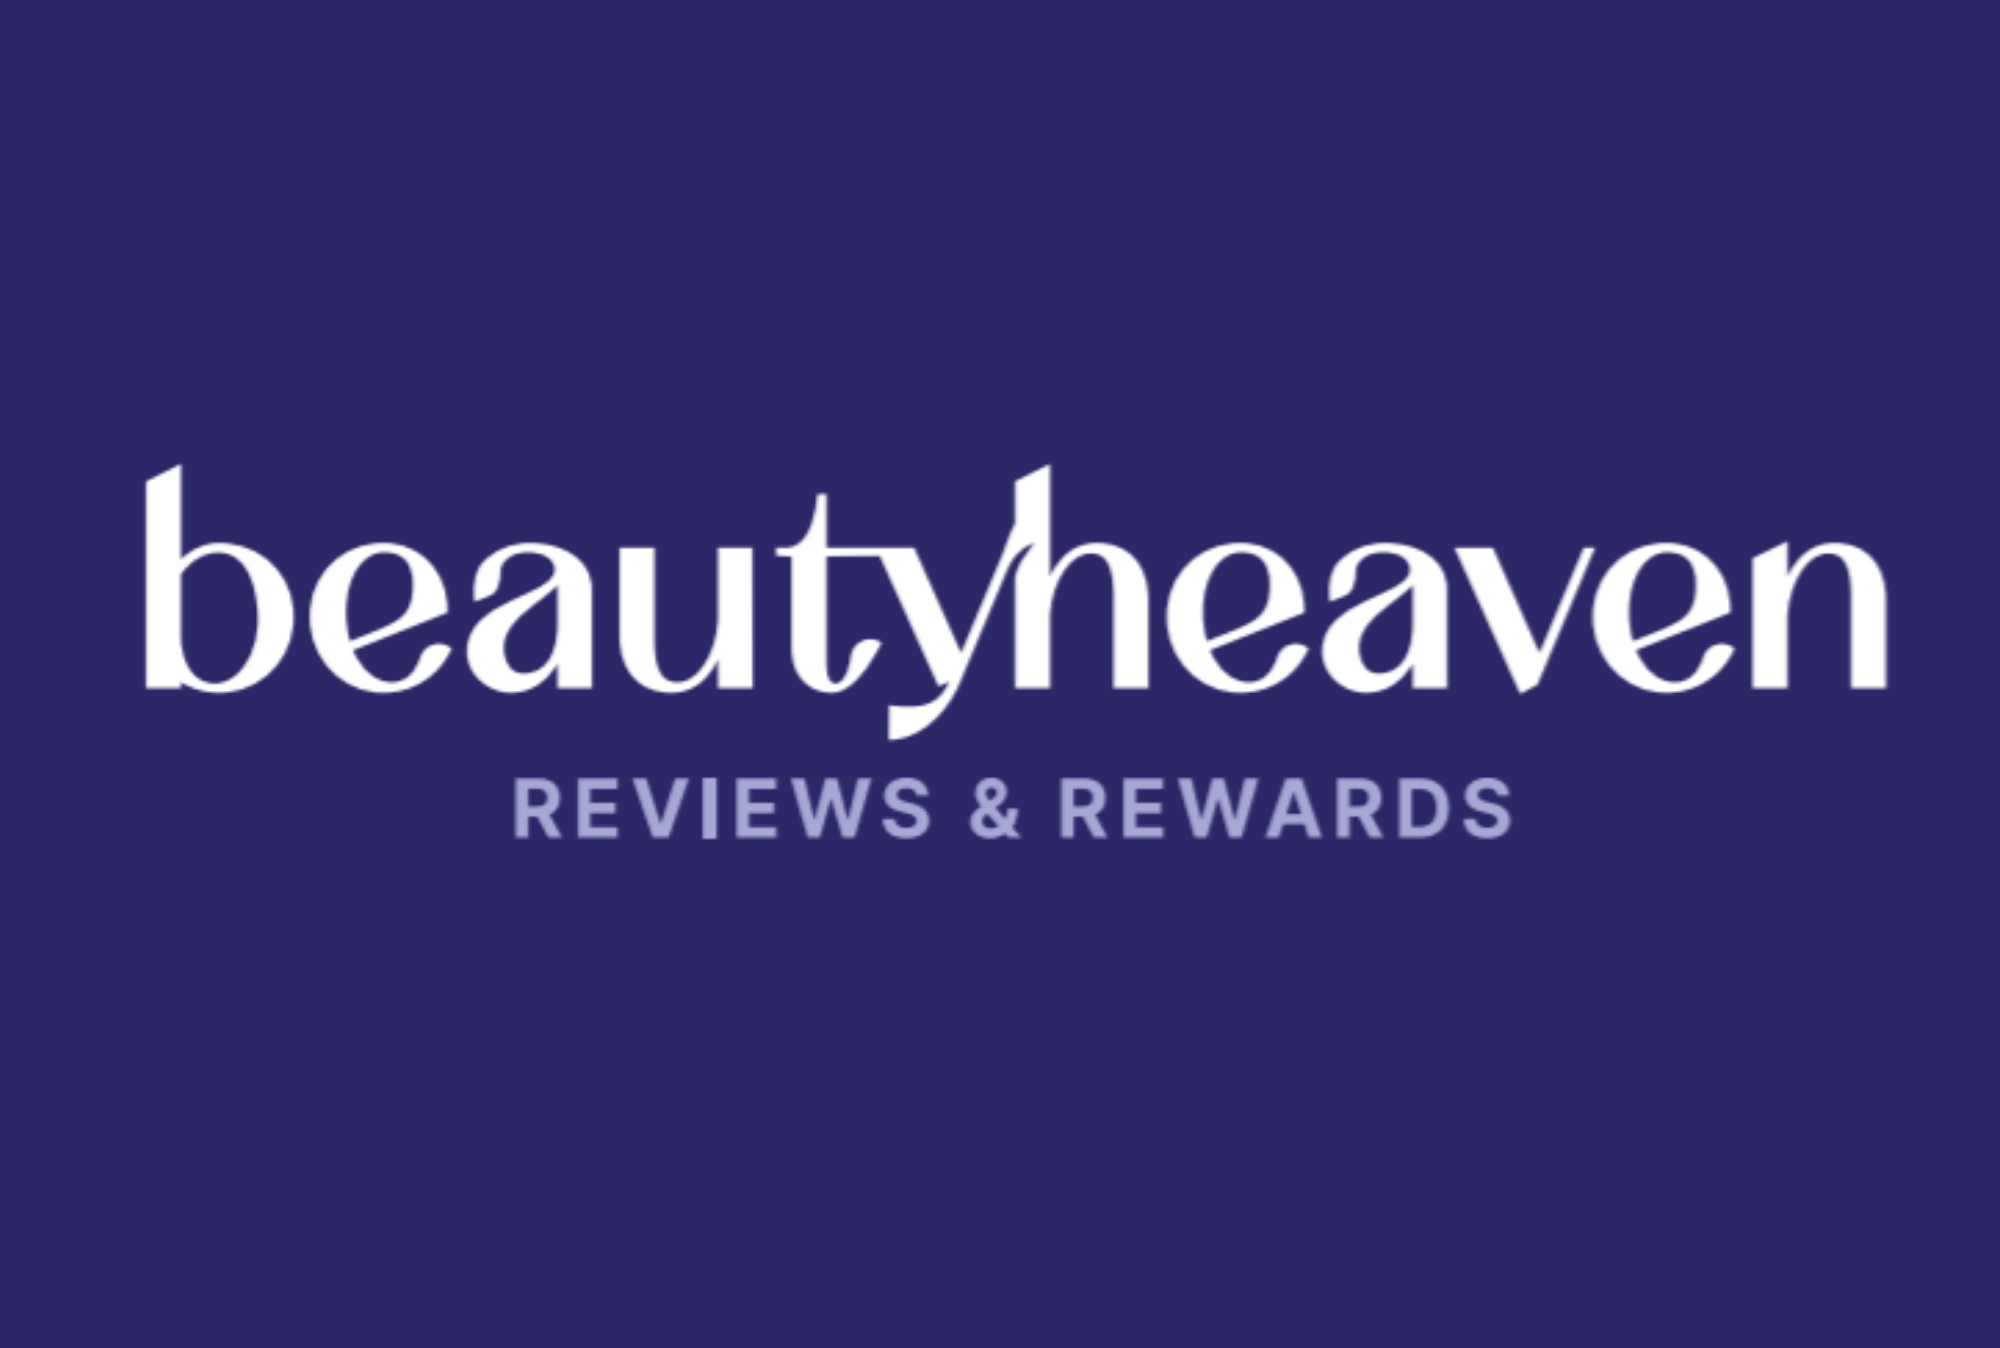 Are Media’s Beautyheaven relaunches with brand refresh and new commercial functionality